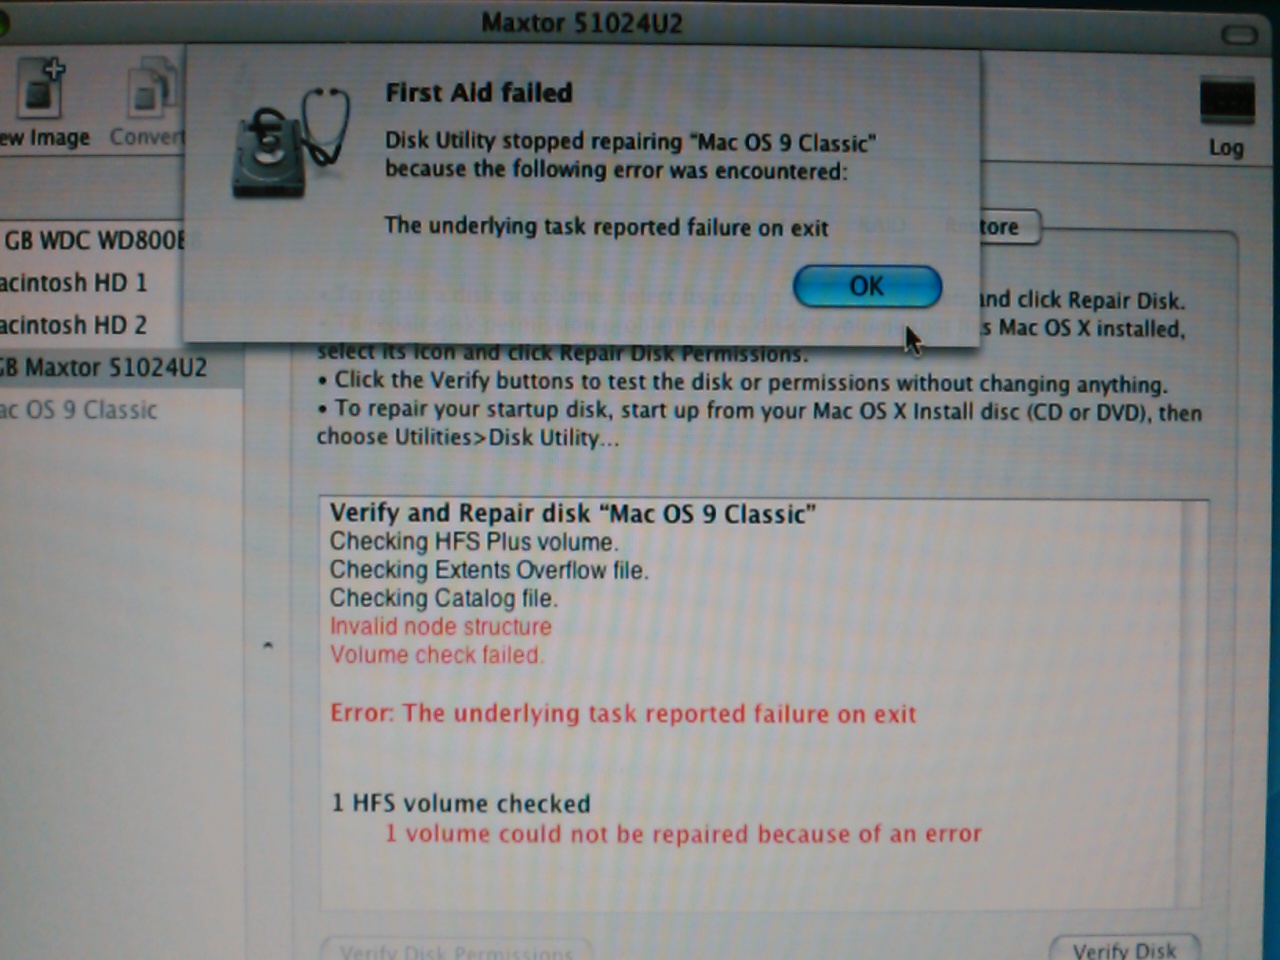 Disk Utility First Aid